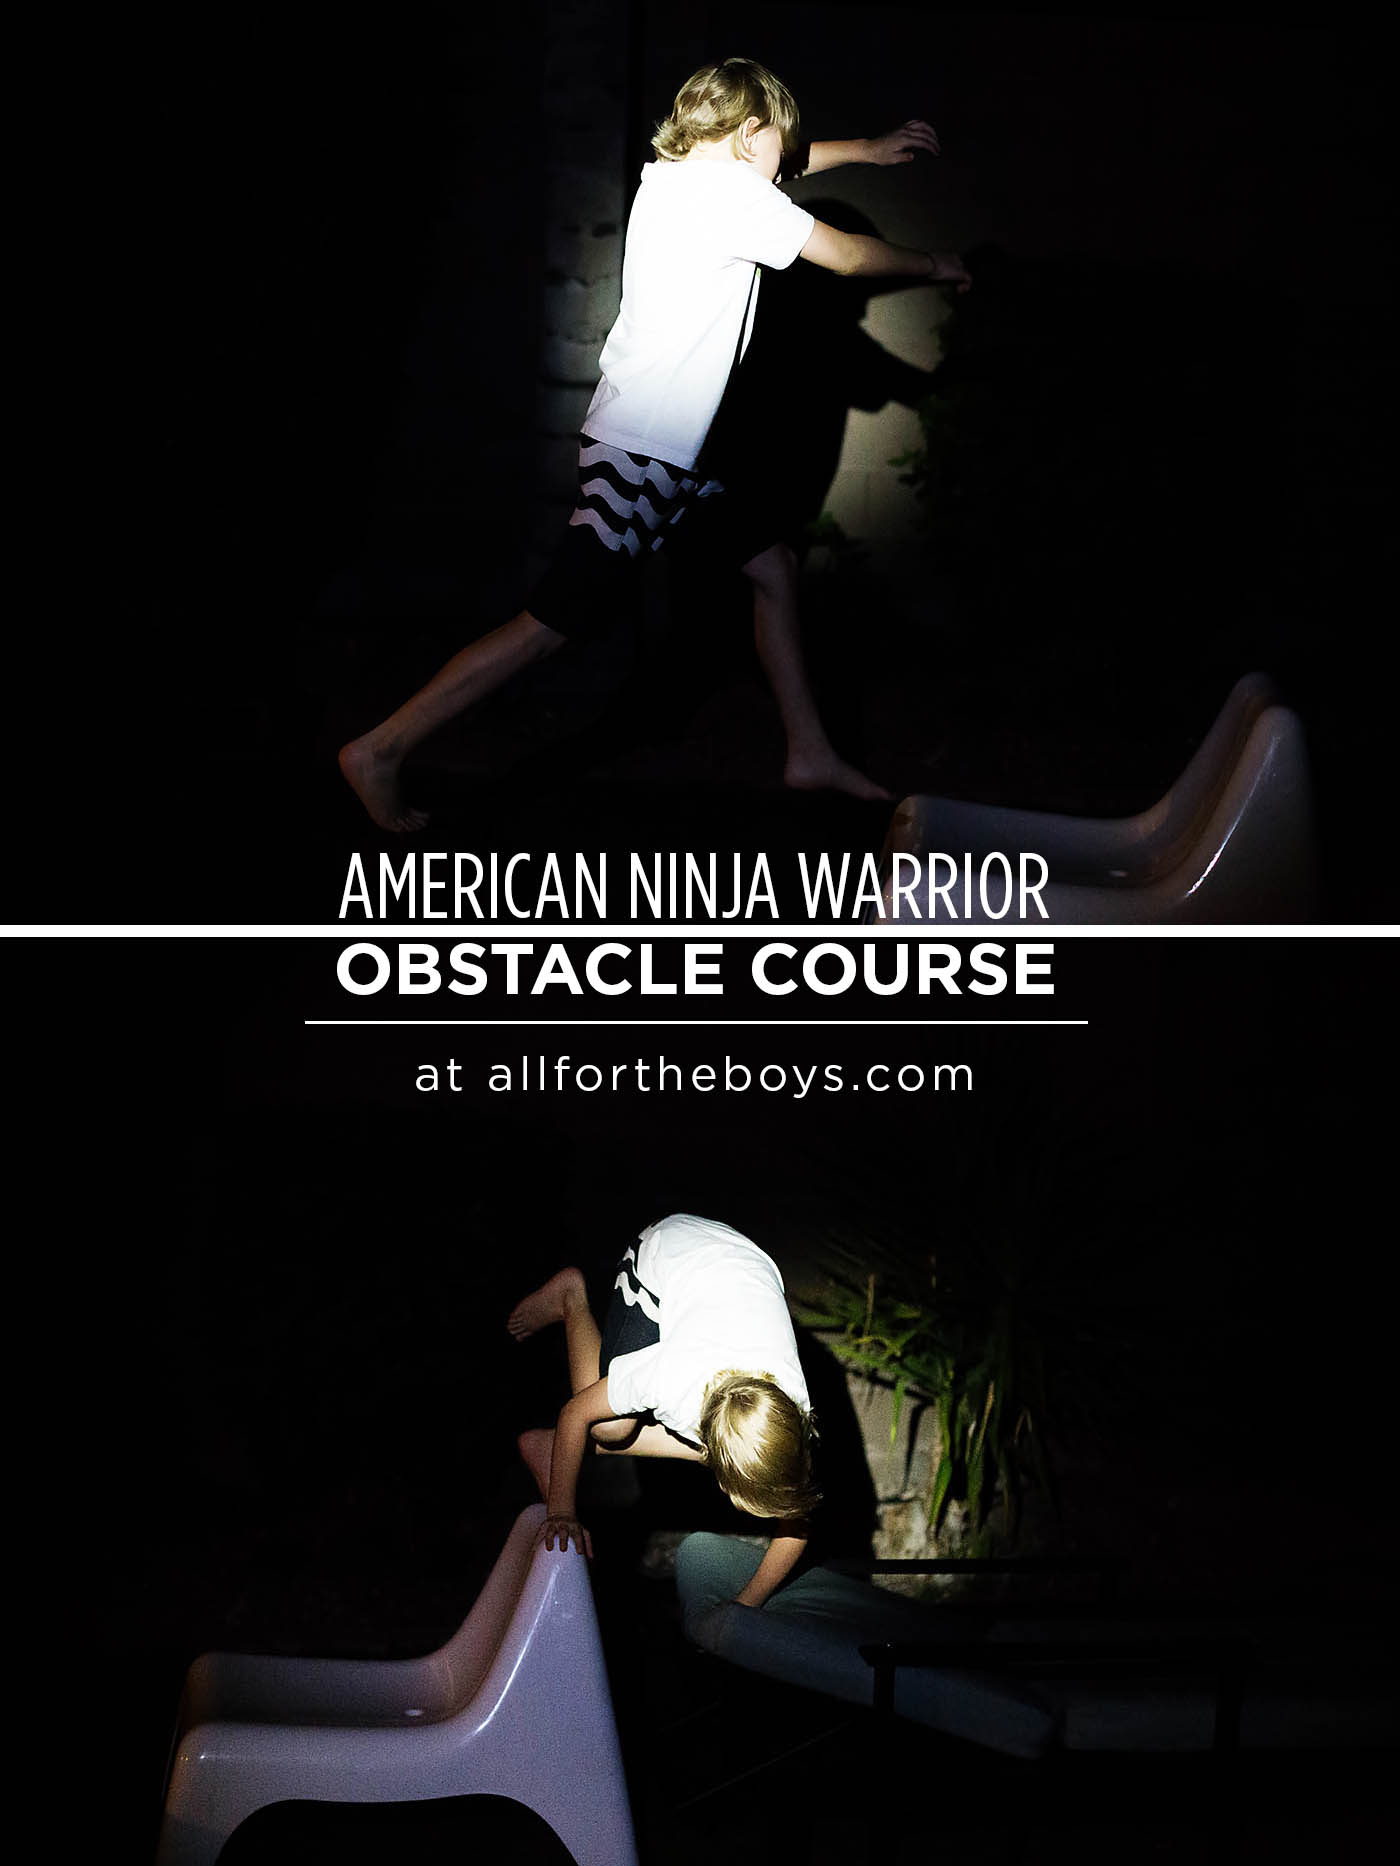 American Ninja Warrior inspired backyard obstacle course. A fun outdoor activity for summer nights!